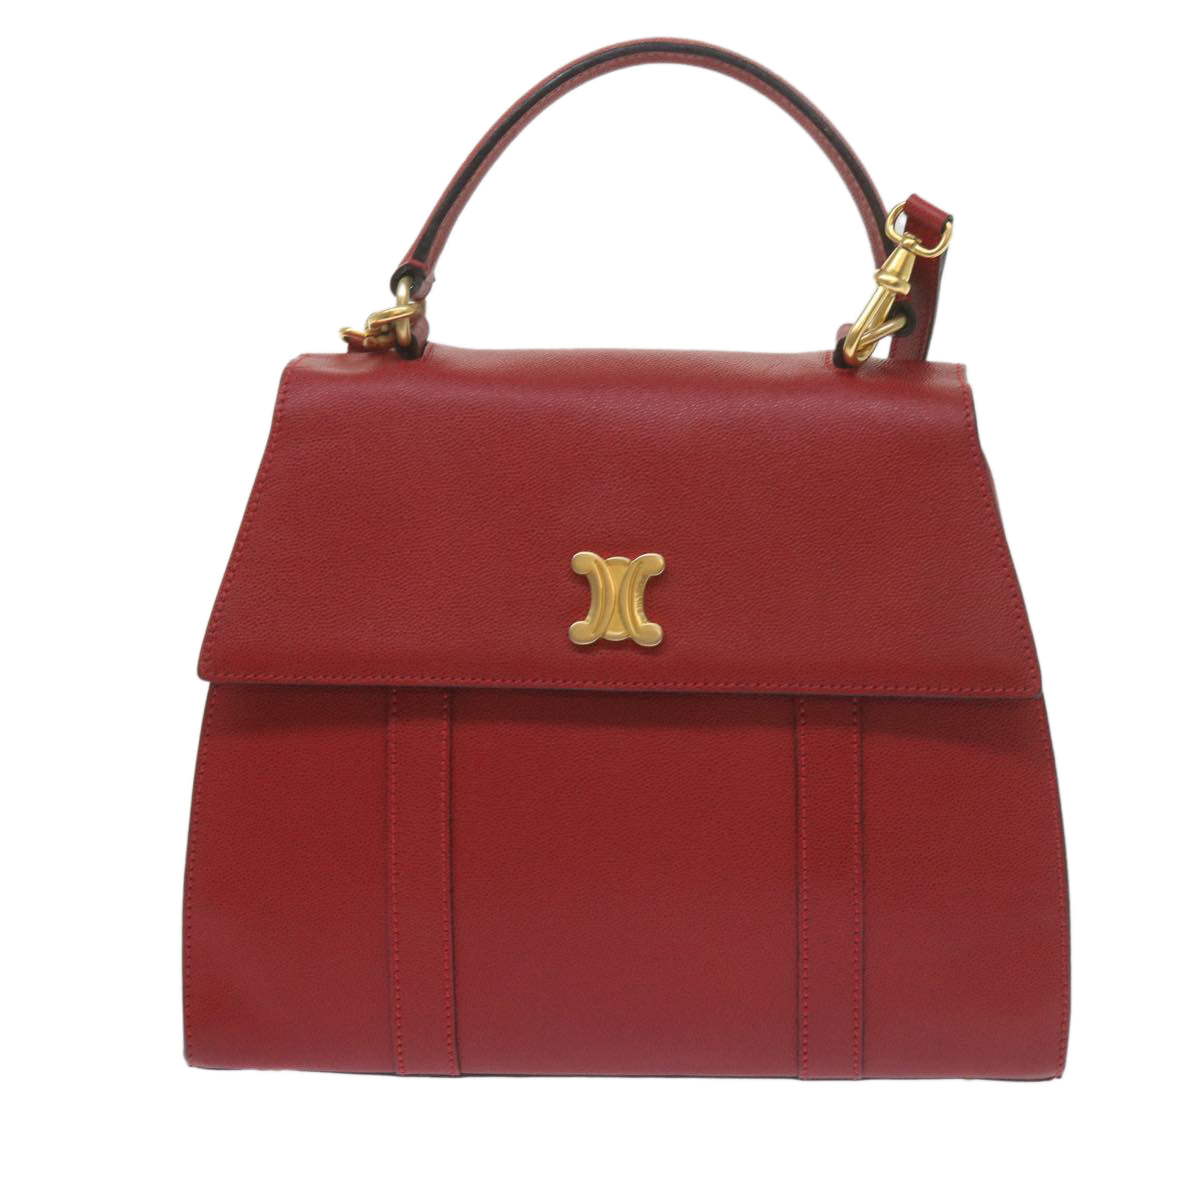 CELINE Hand Bag Leather 2way Red Auth am5388 - 0